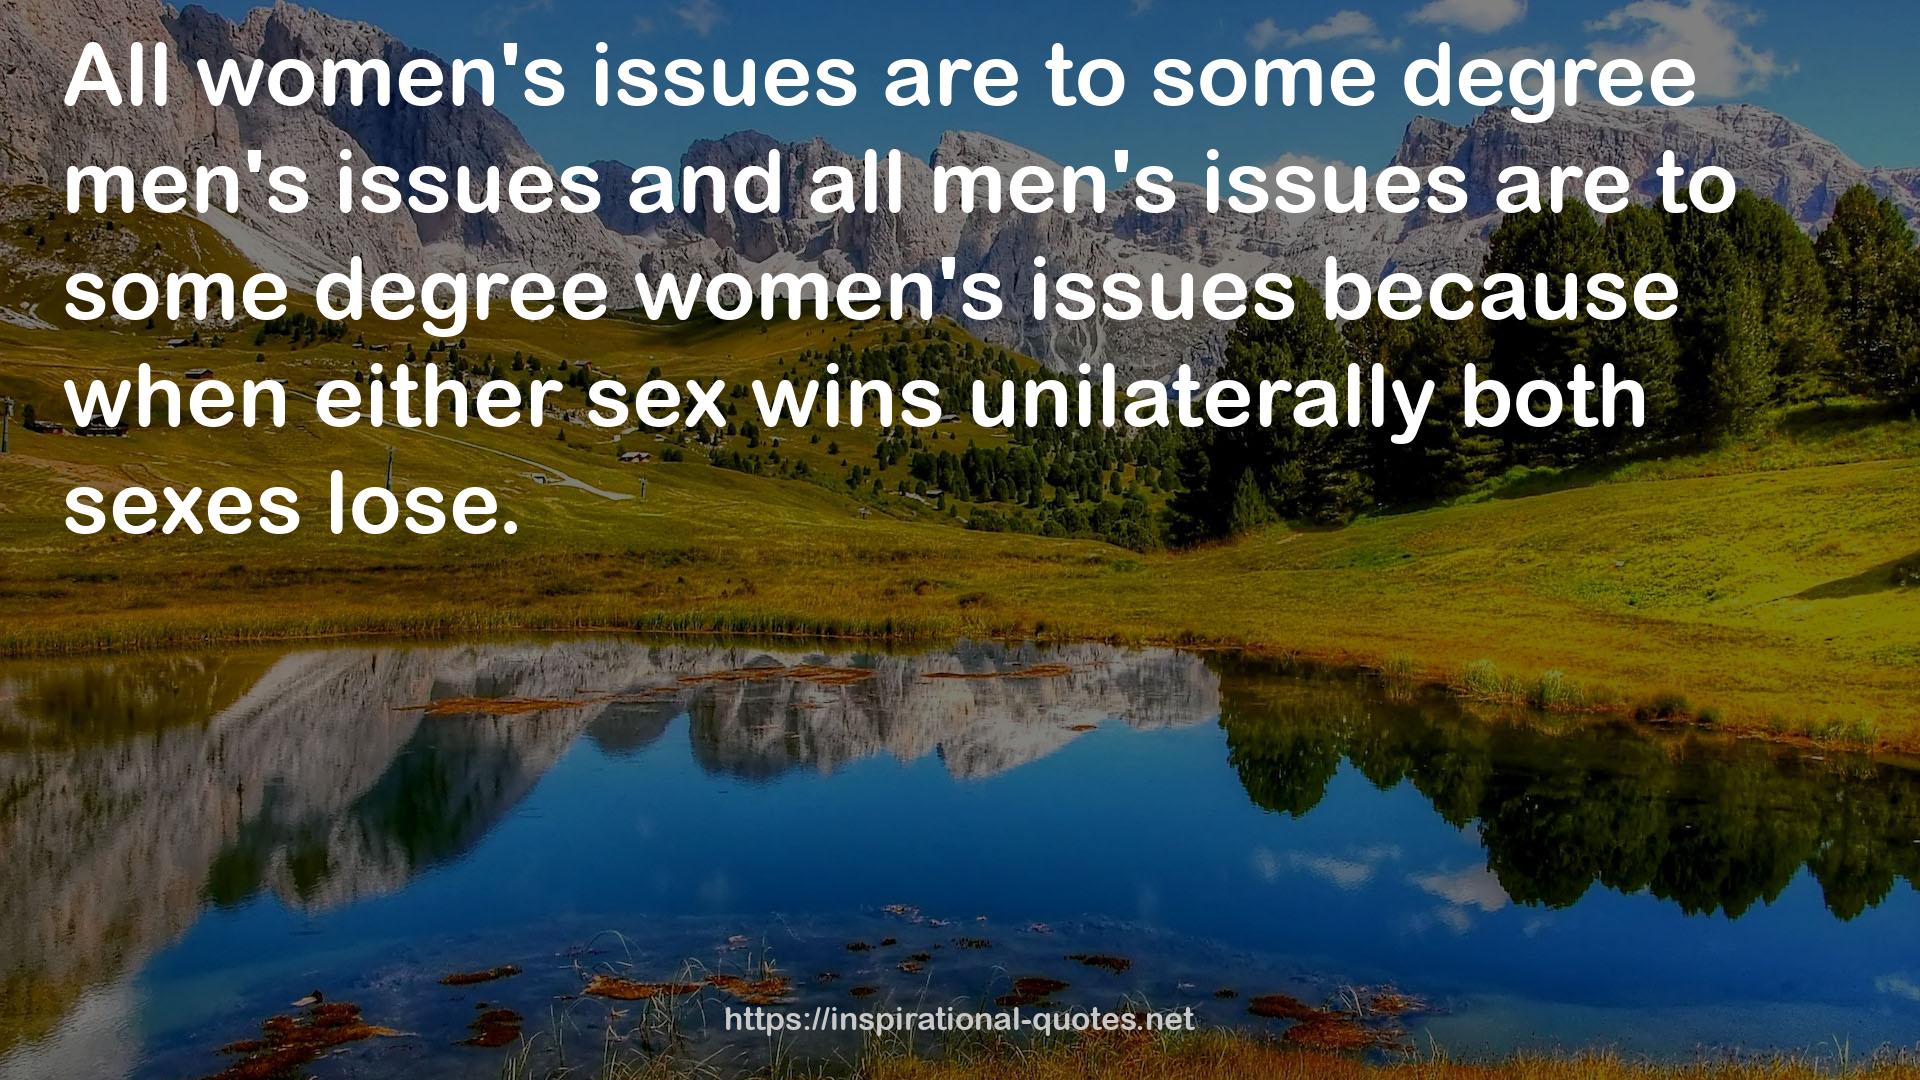 some degree men's issues  QUOTES